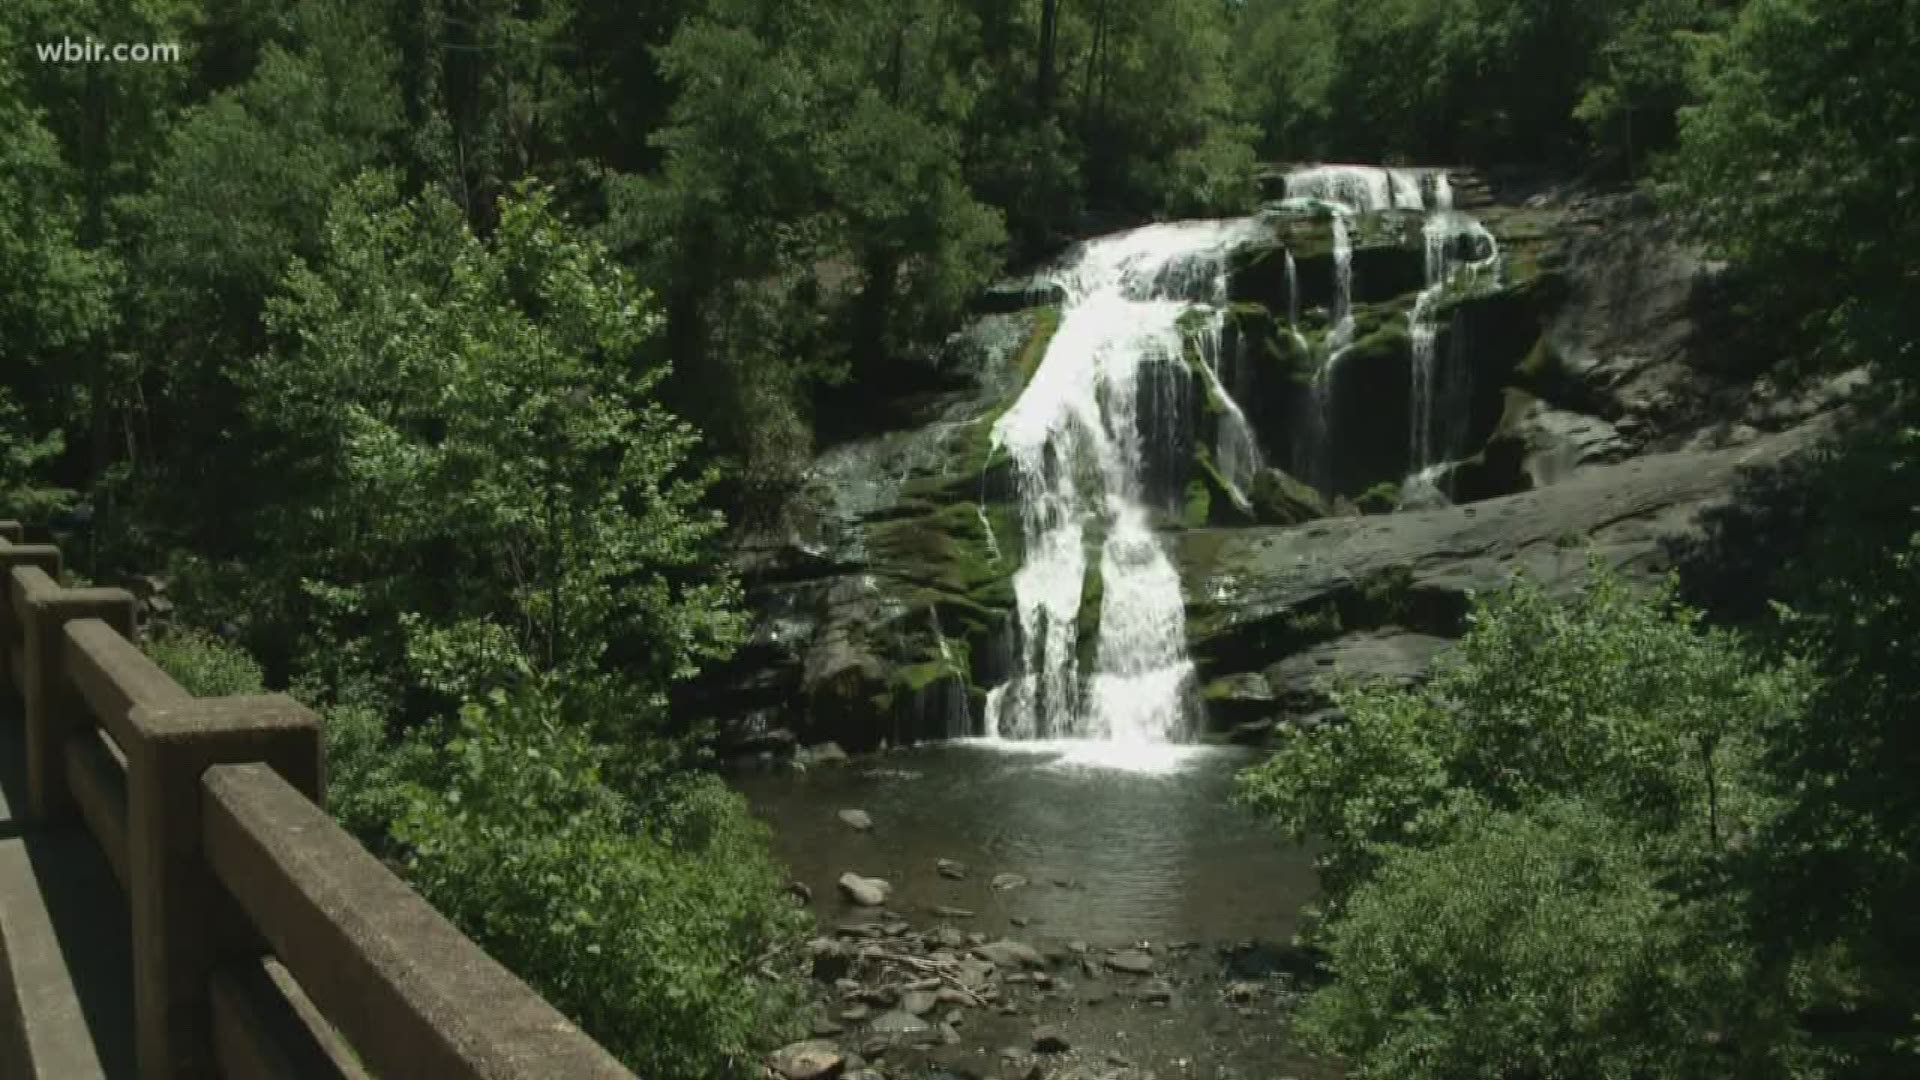 Today we are highlighting Monroe county and all that it has to offer. And one of the best parts is its views of nature. Meteorologist Rebecca Sweet shows us what you can do here in the great outdoors.